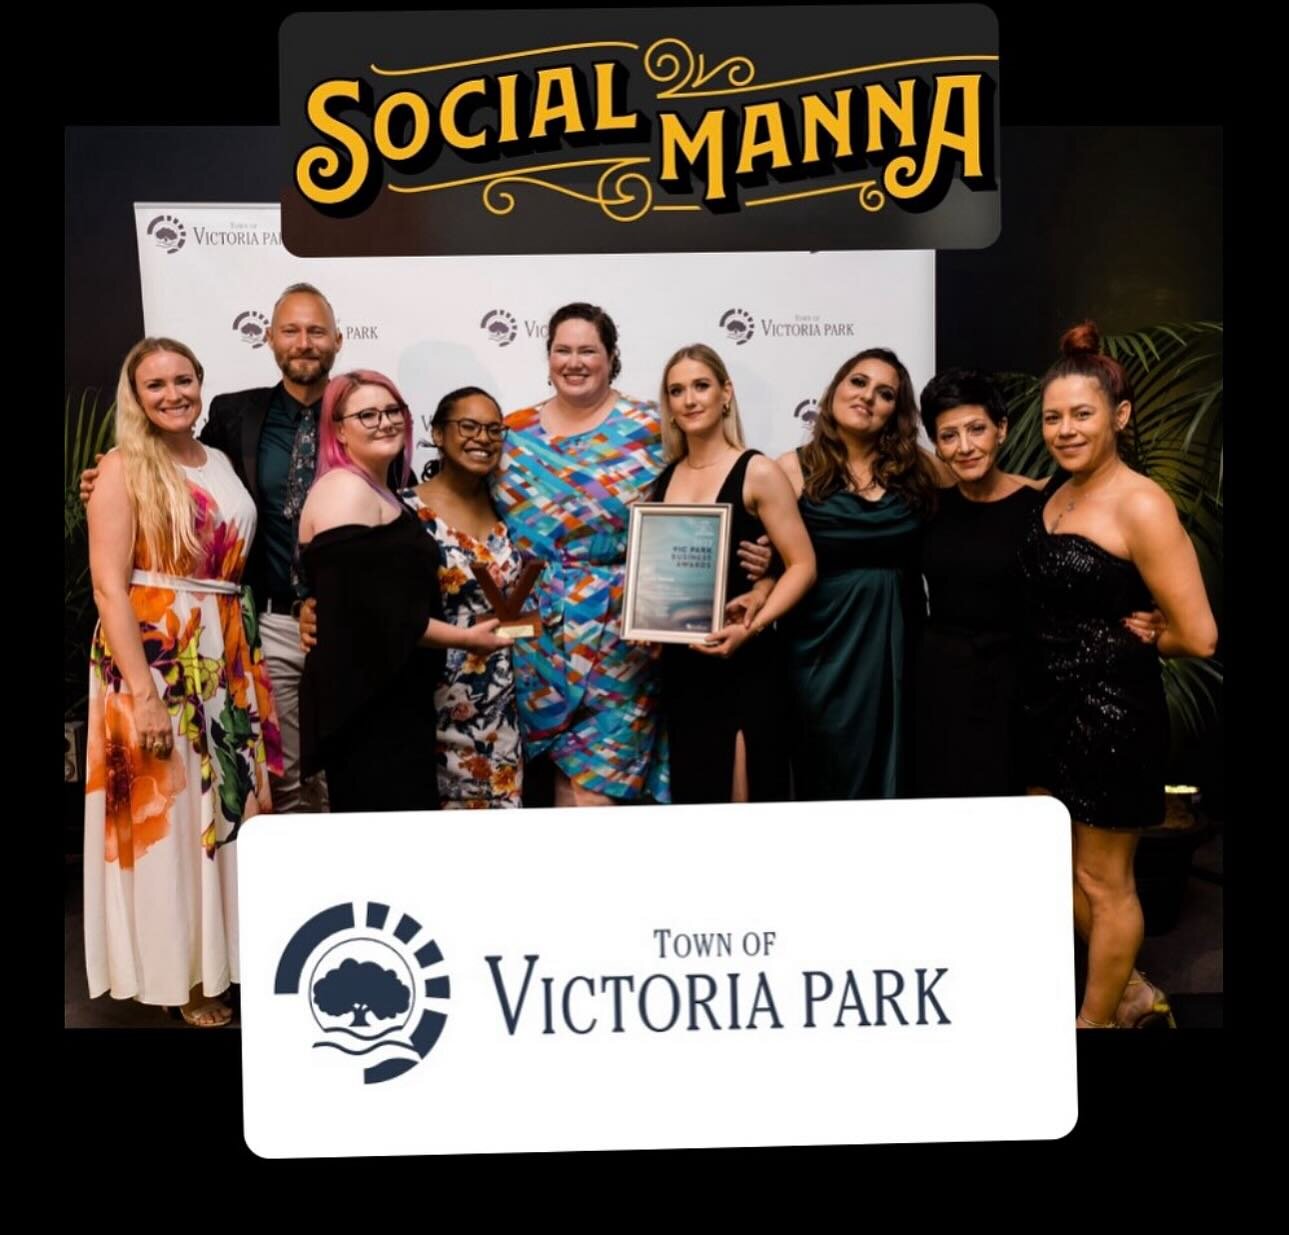 Our local Vic Park coffee shop @social.manna has been nominated for the people&rsquo;s choice award! If you have a spare minute could you please vote for them! 

Please share this to spread the word about this amazing team 

https://www.victoriapark.